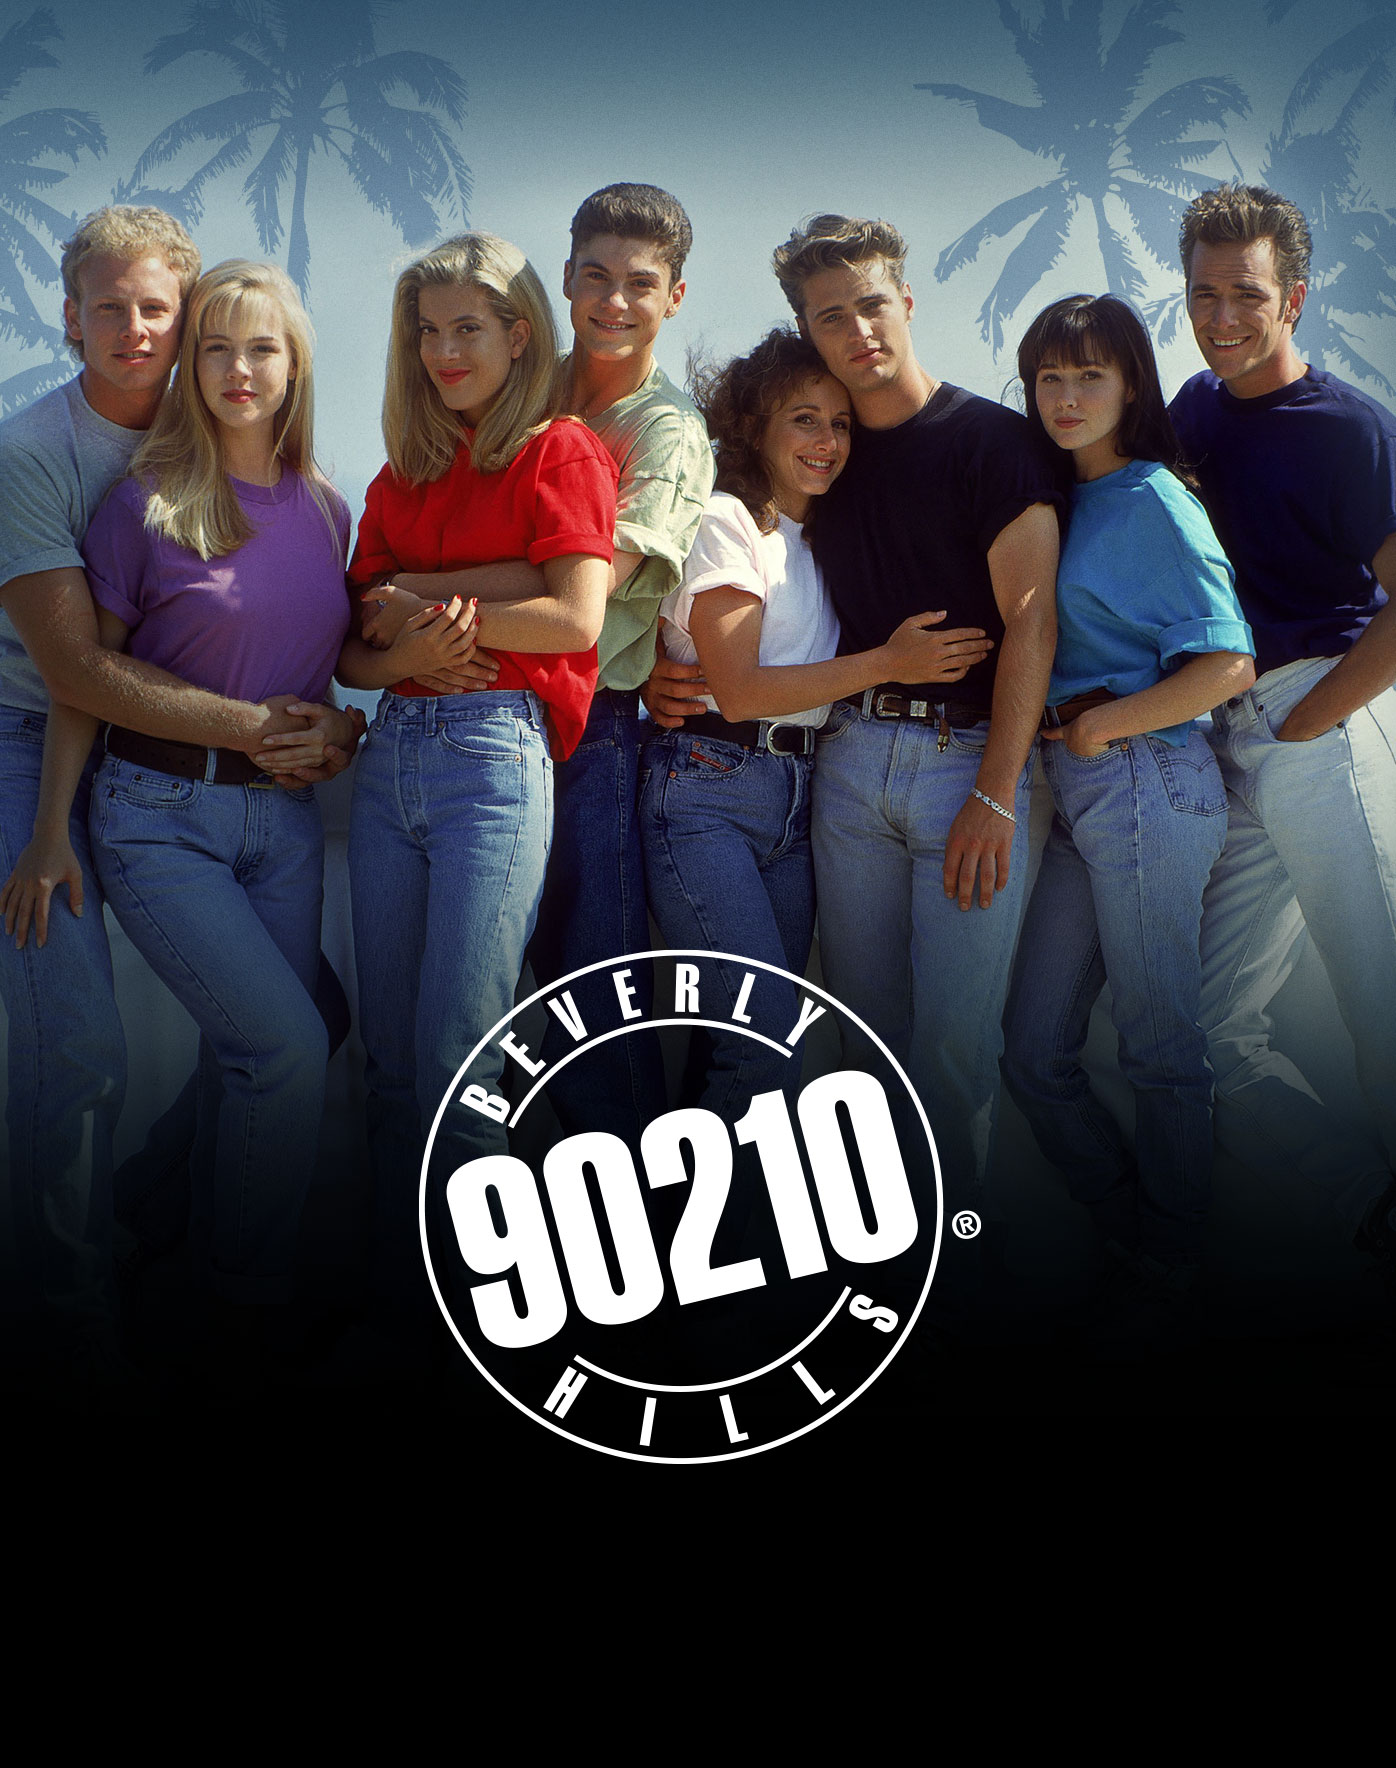 Beverly Hills 90210 Francais Beverly Hills 90210 | Television Wiki | Fandom